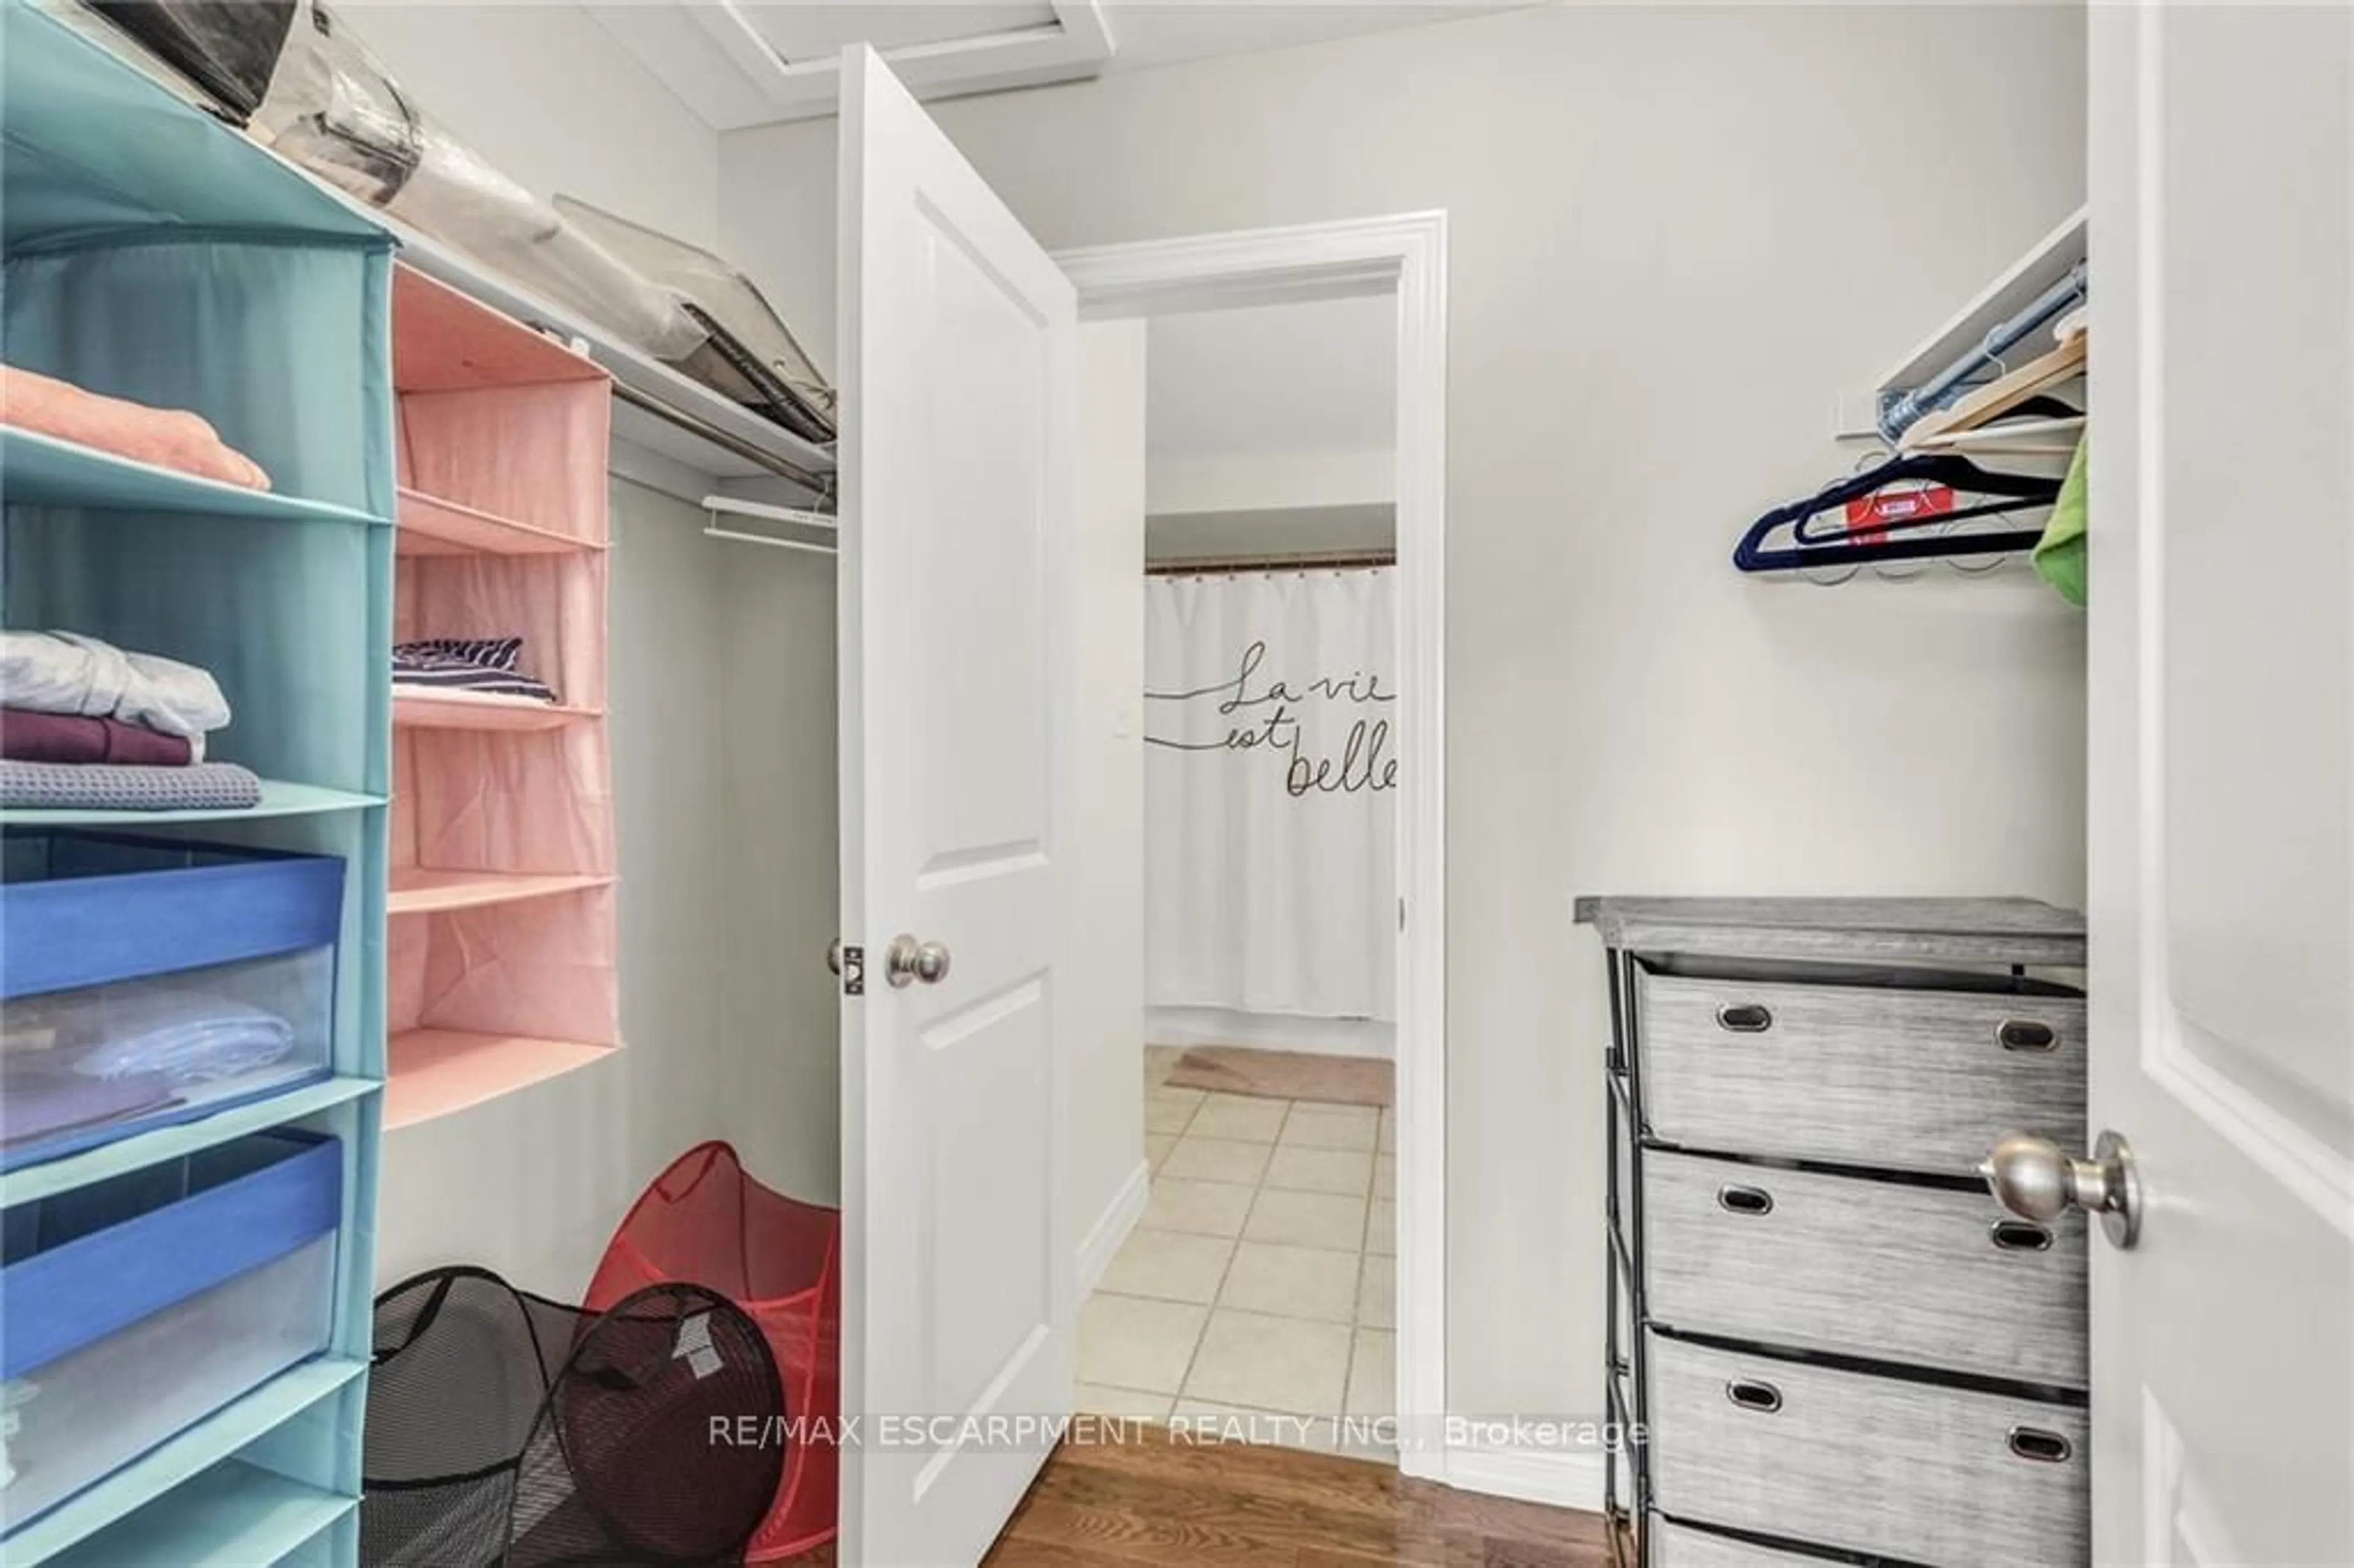 Storage room or clothes room or walk-in closet for 437 Highway 8 #13, Hamilton Ontario L8G 5G6